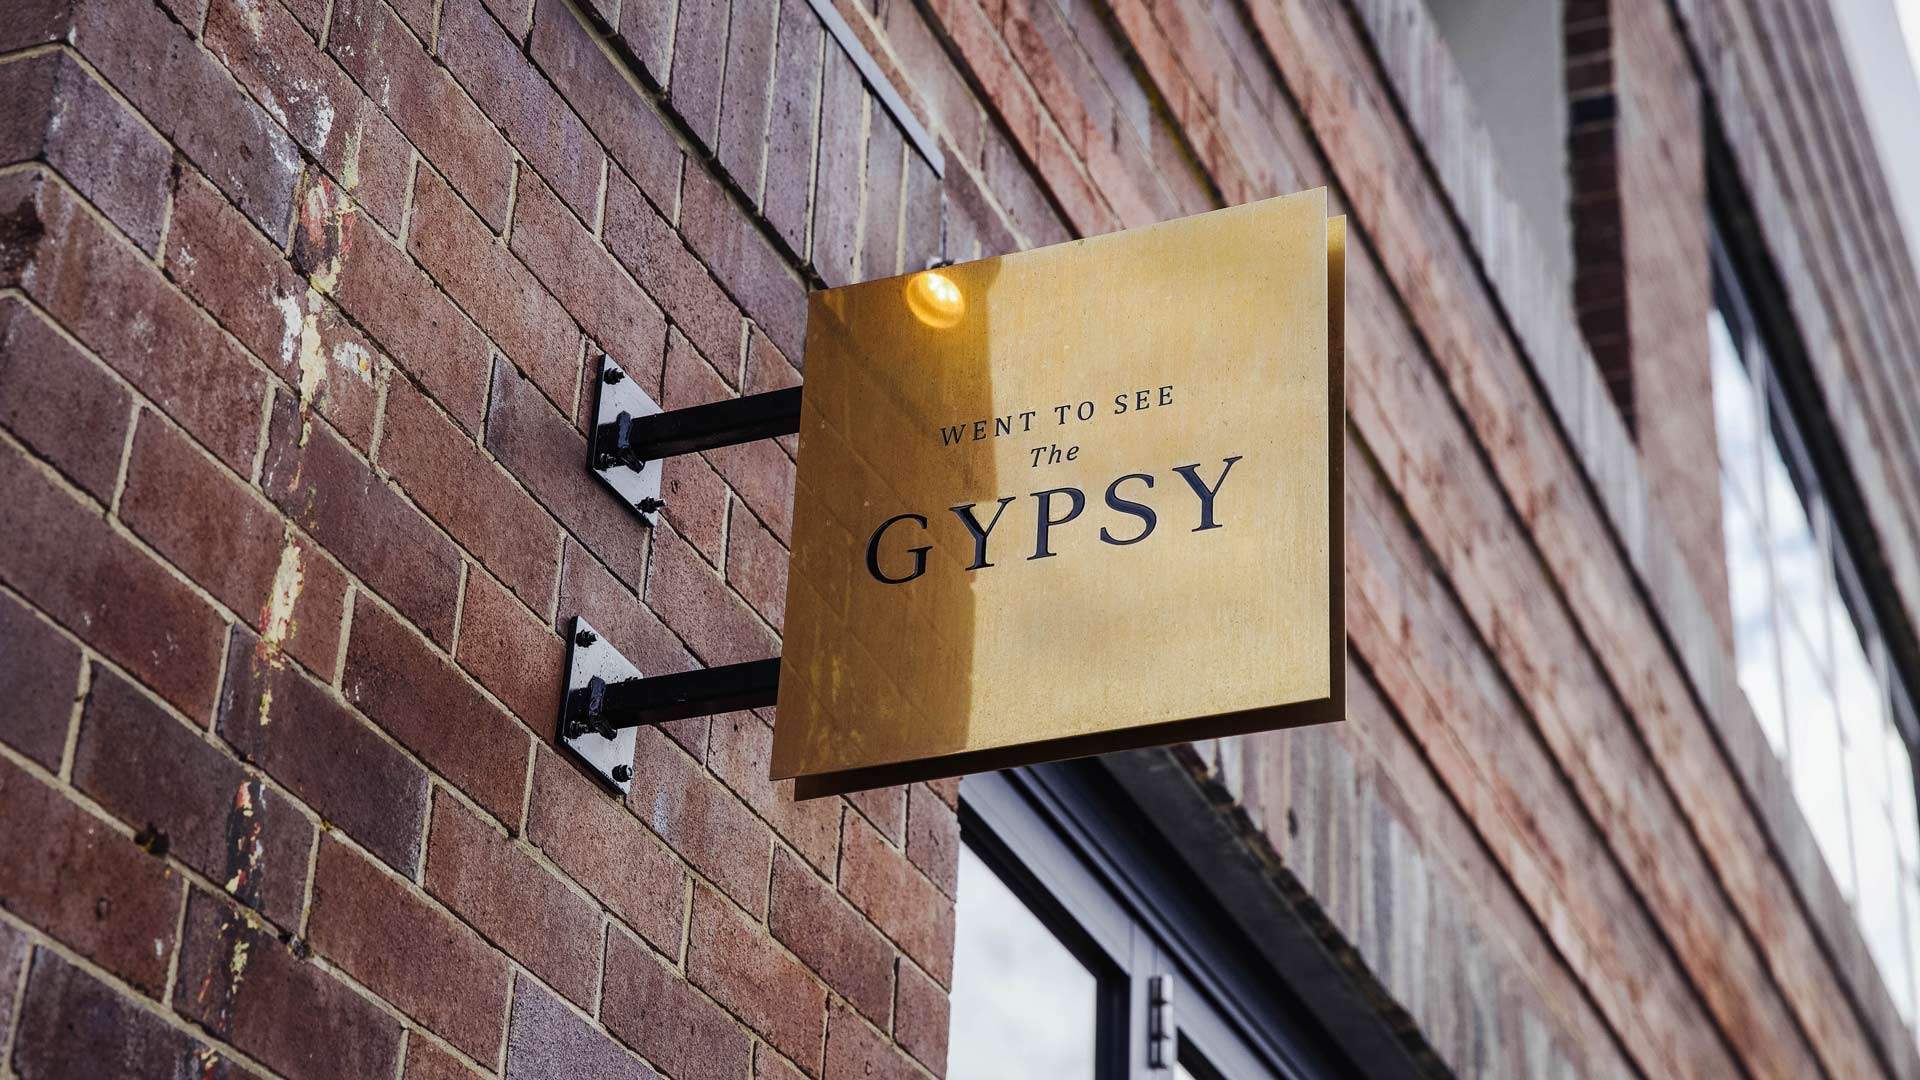 Went to See the Gypsy - CLOSED